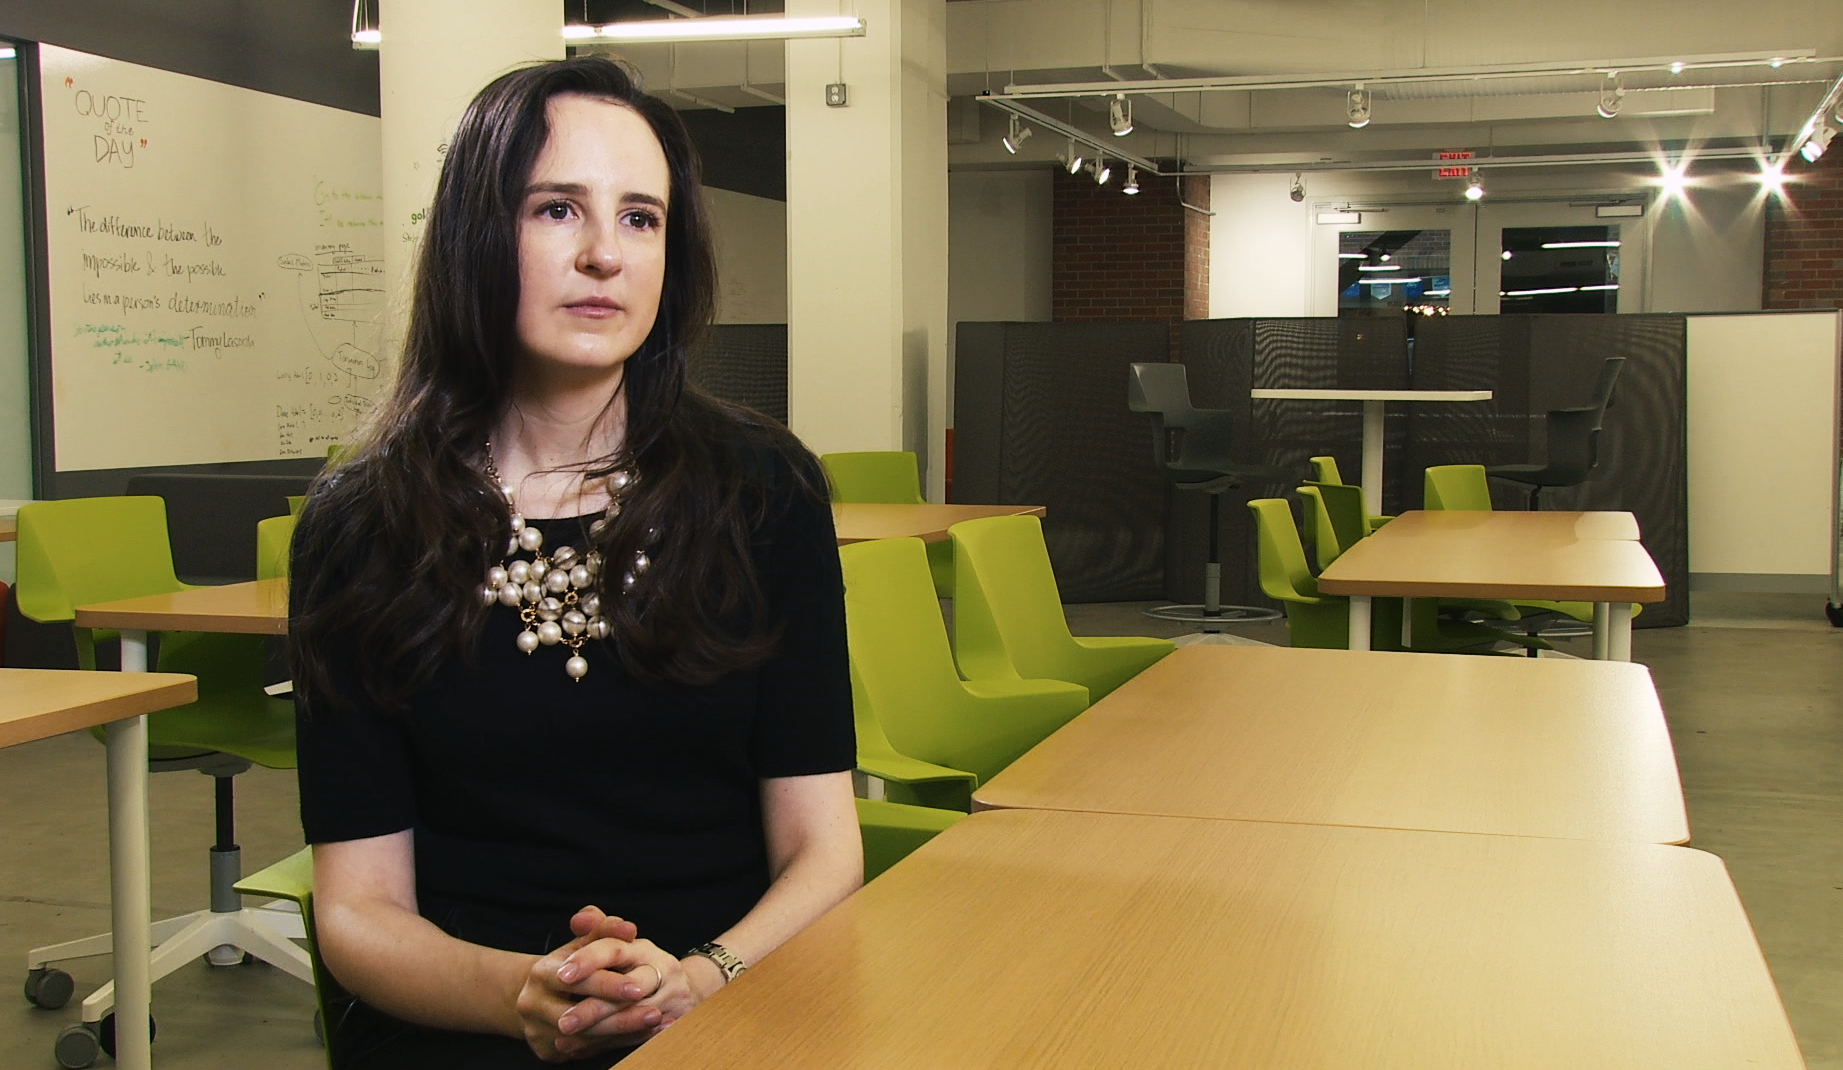 Anya Babbitt, CEO of SPLT, just moved to Detroit to grow her firm which provides ride sharing via an app her company developed. (credit: Paul Pytlowany/CBS 62)